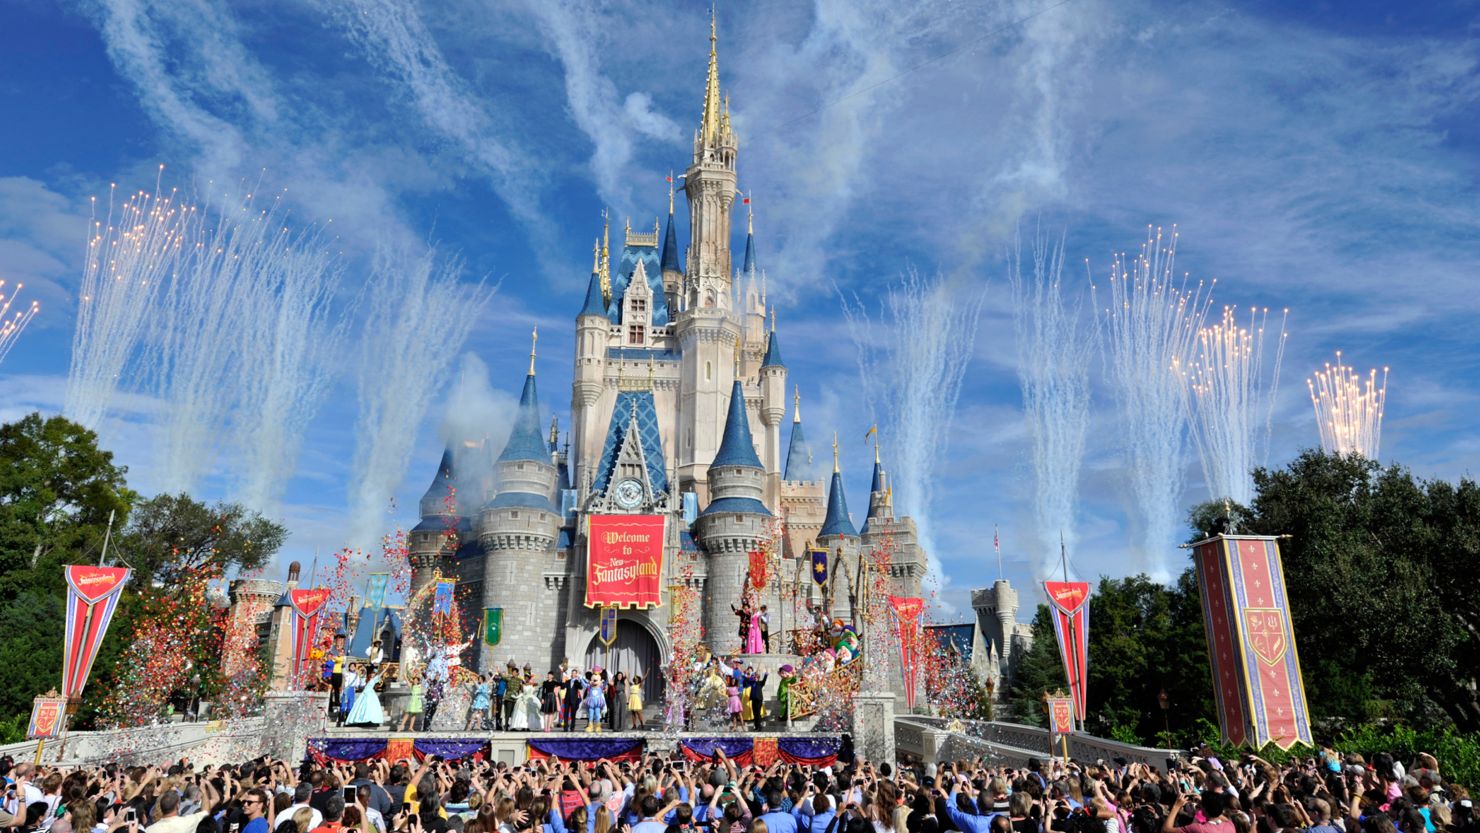 Disney is the latest company to do away with plastic straws